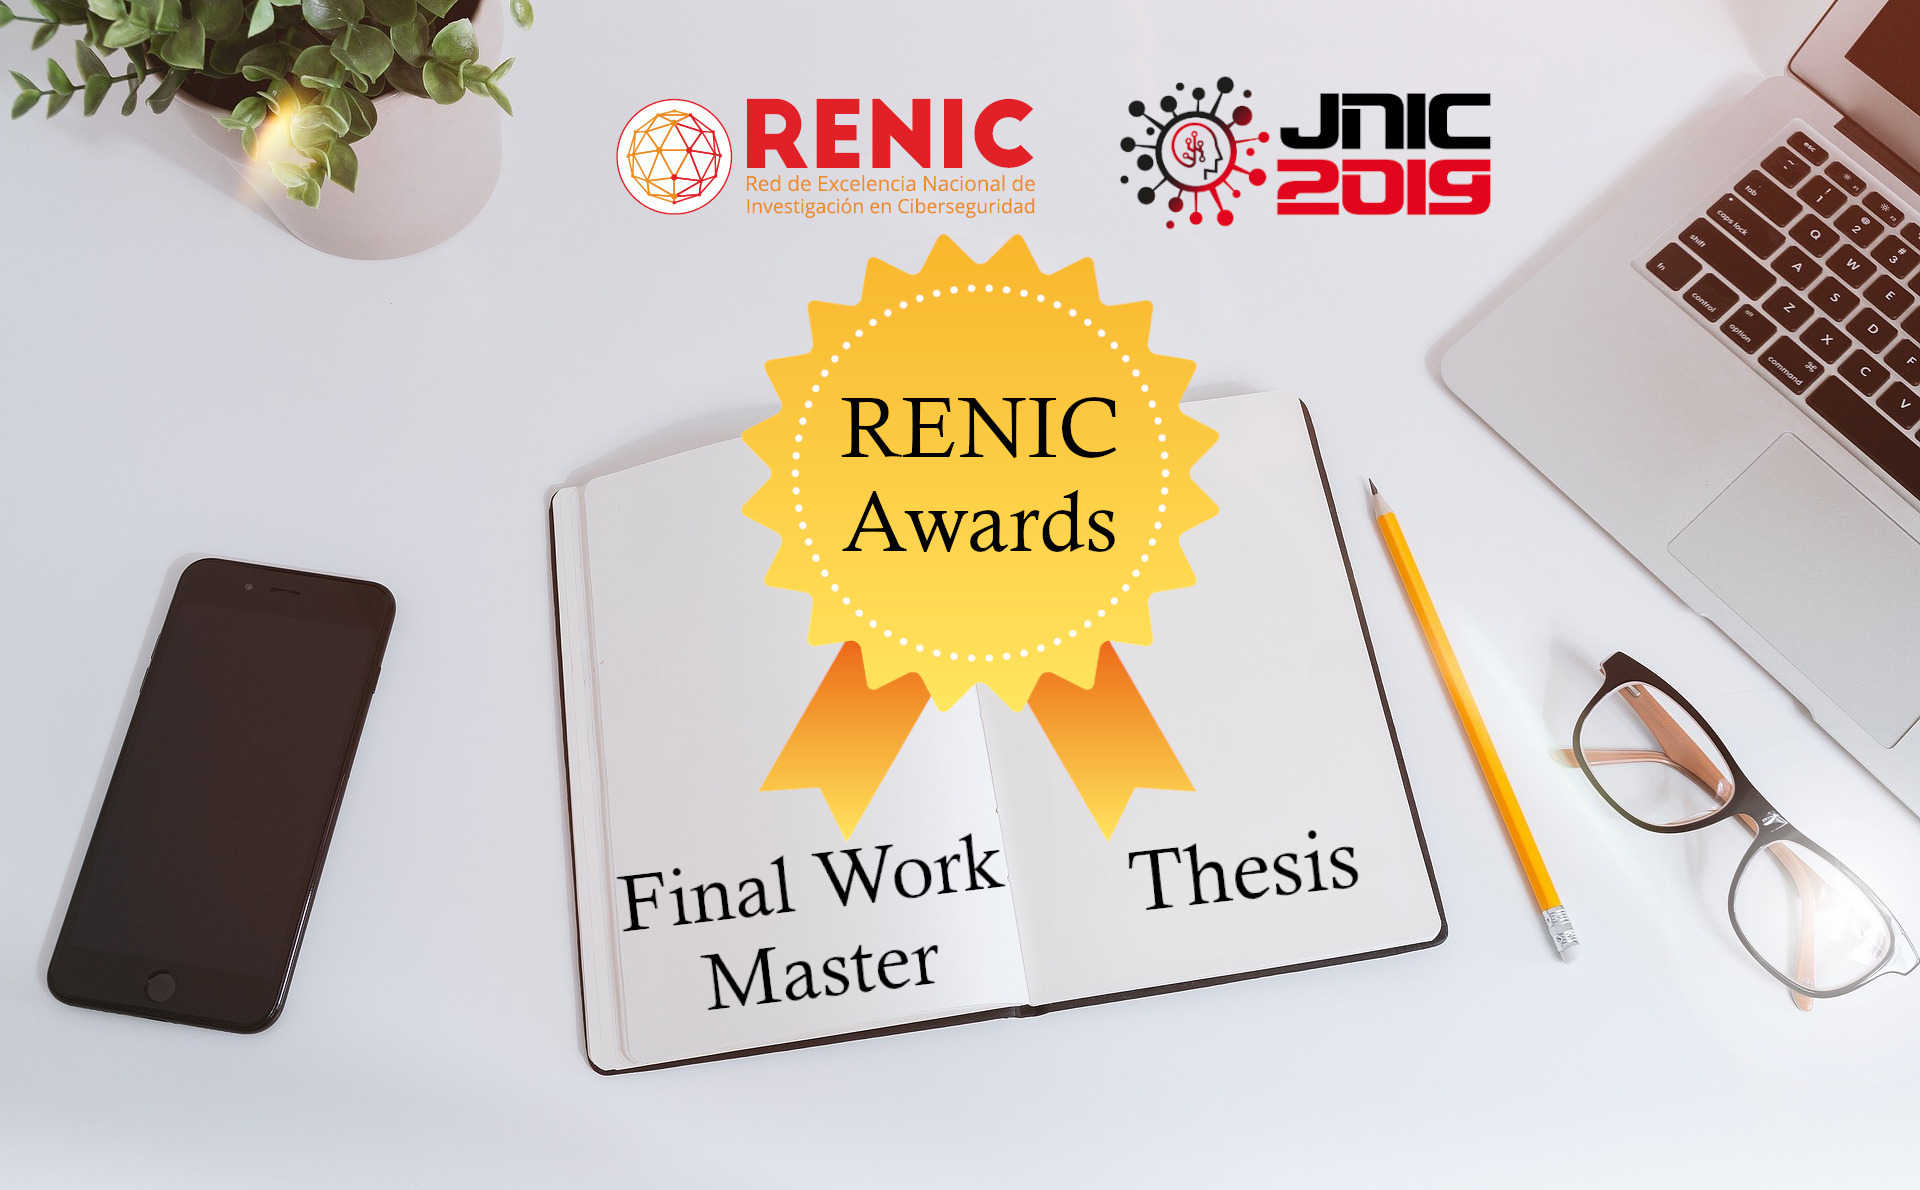 Resolution of the 1st Edition of RENIC Awards for the best Doctoral Thesis and best Final Work of Master